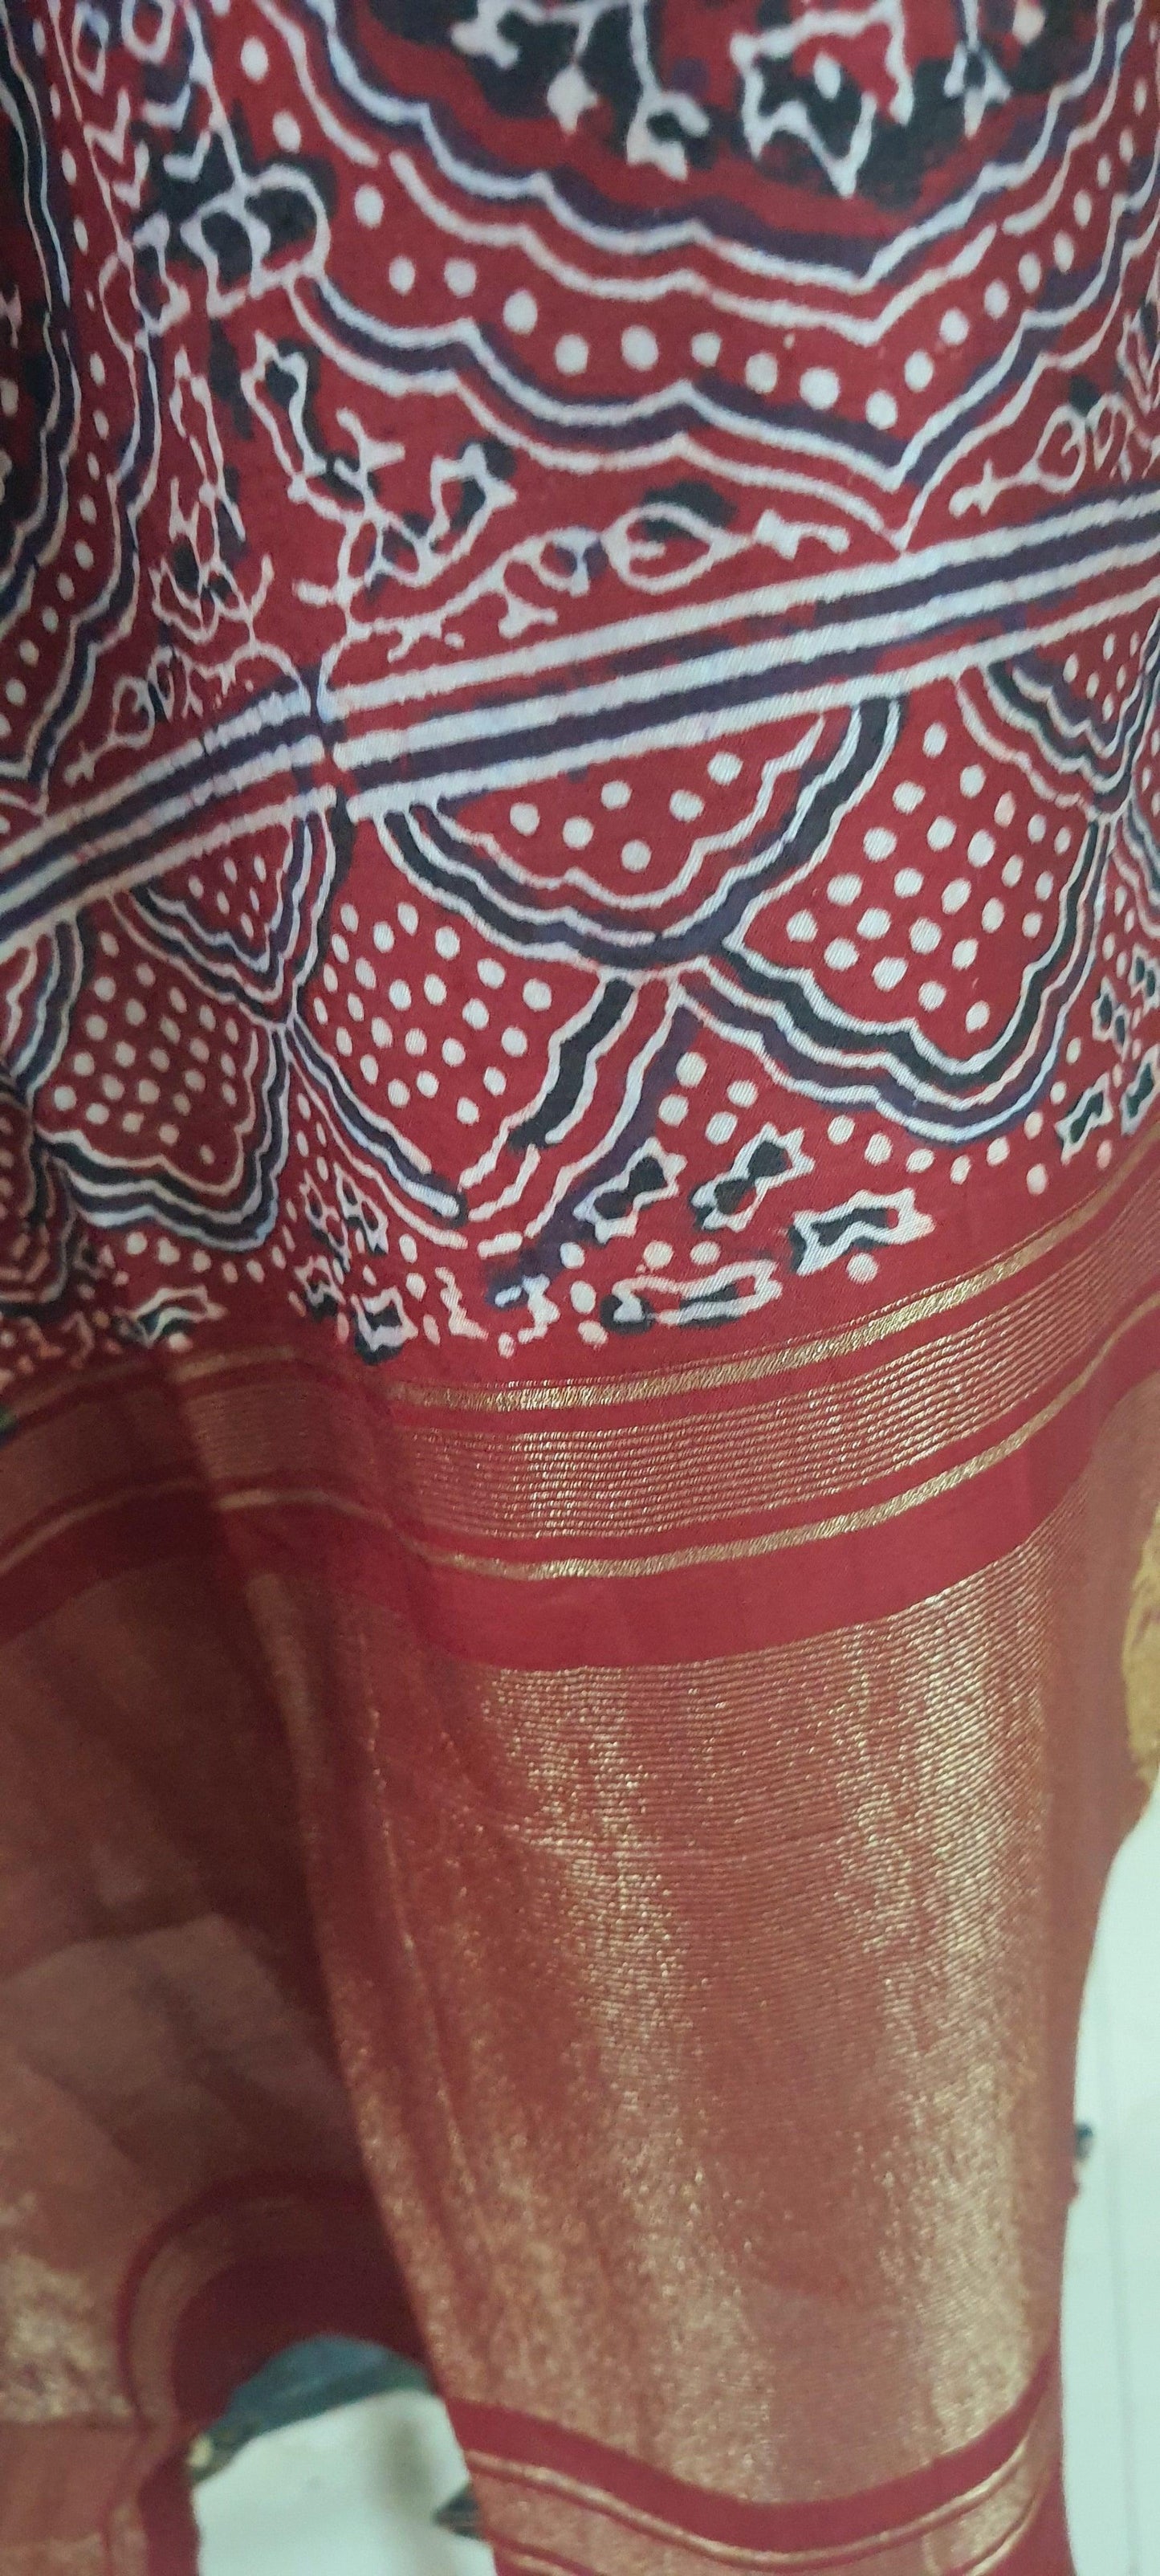 Maroon Munga Silk Ajrakh Printed Dupatta With Weaving Border and palla DP101 - Ethnic's By Anvi Creations